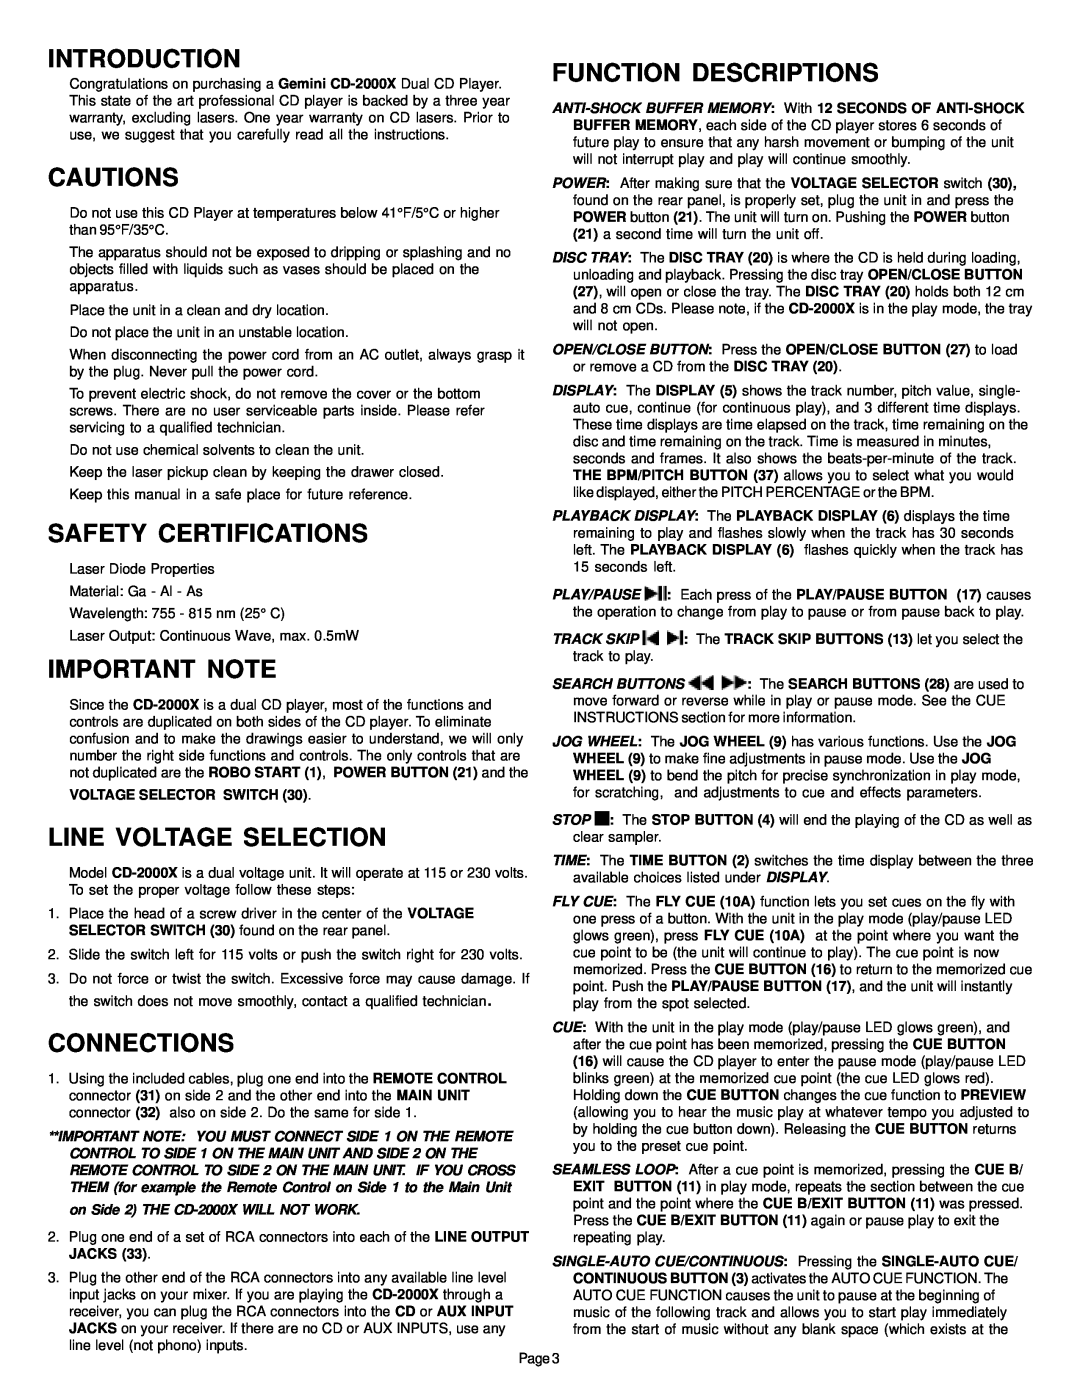 Gemini CD-2000X manual Introduction, Function Descriptions, Cautions, Safety Certifications, Important Note, Connections 